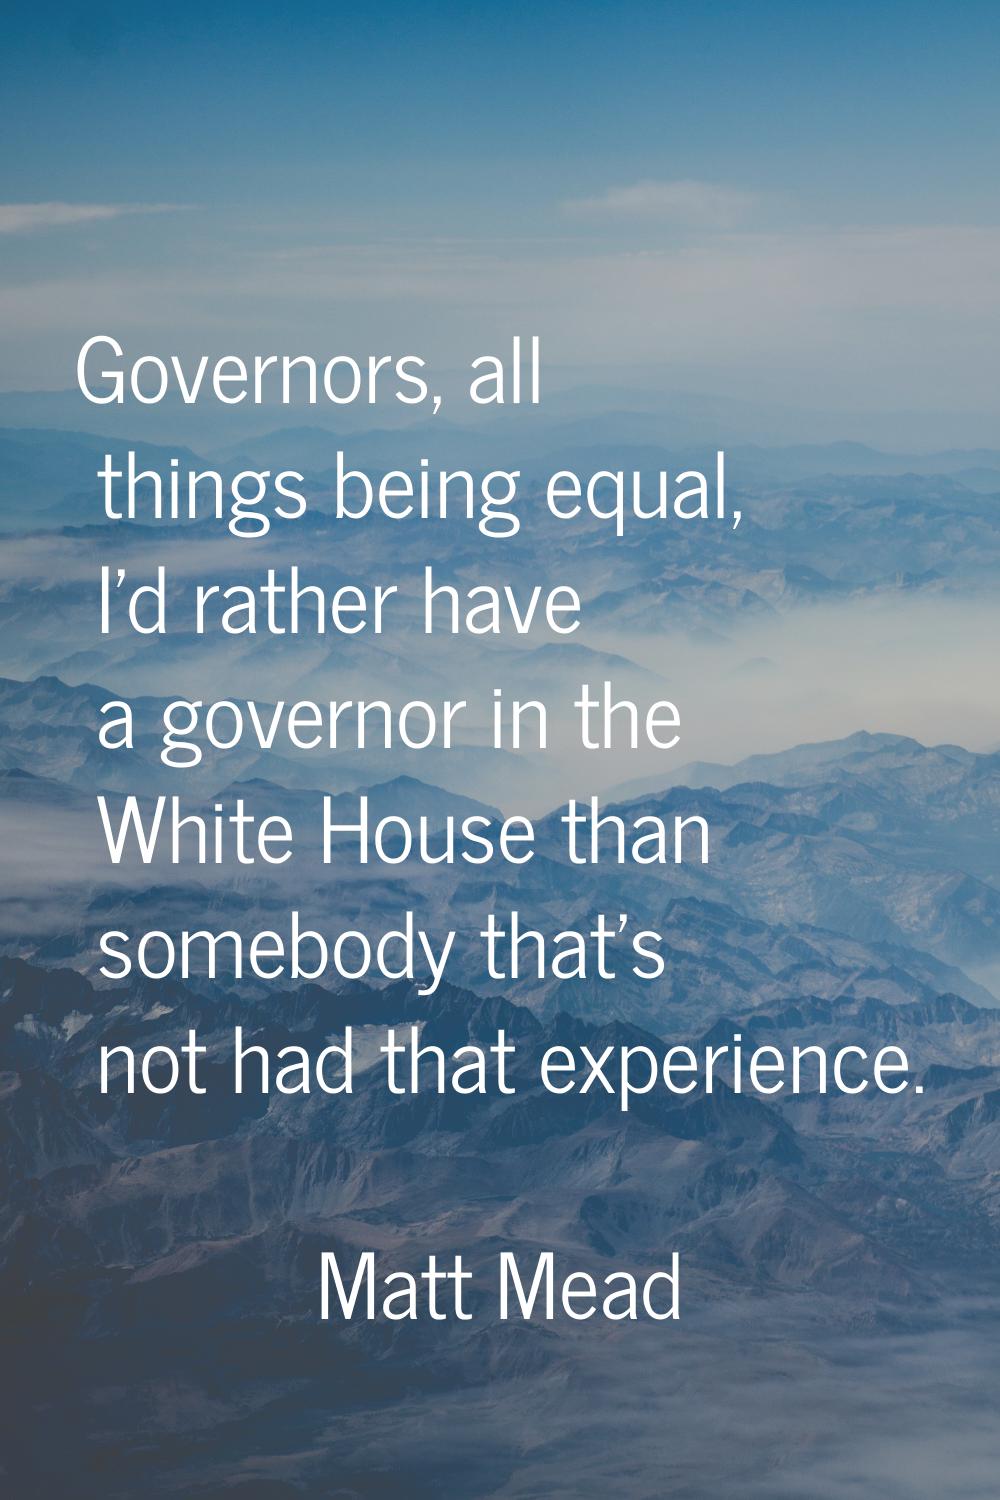 Governors, all things being equal, I'd rather have a governor in the White House than somebody that